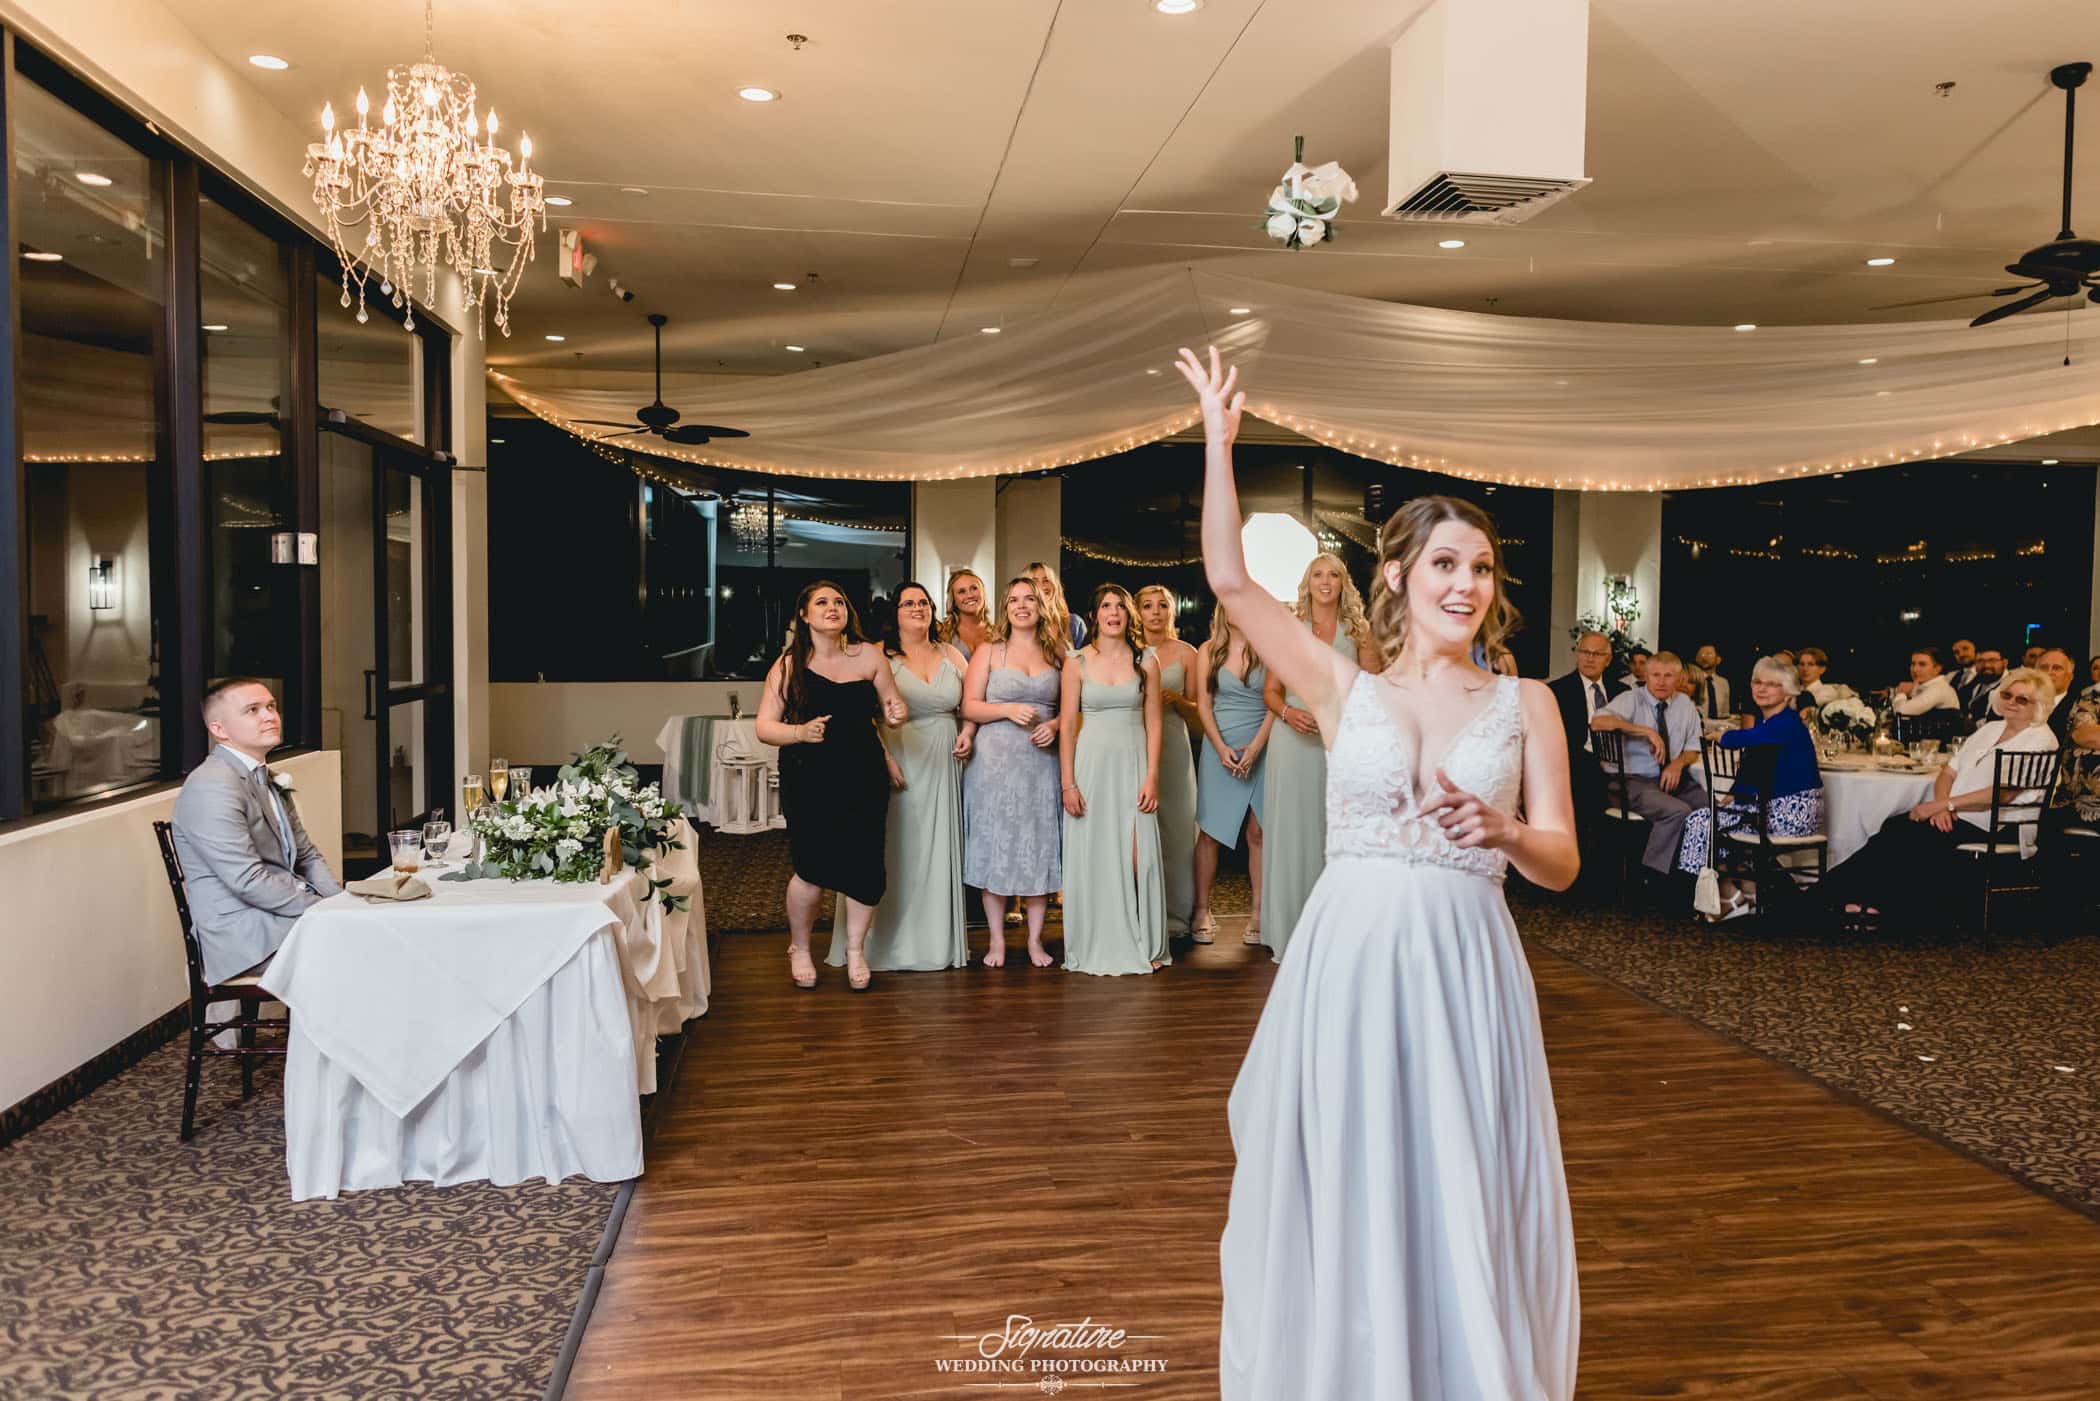 Bride about to do the bouquet toss